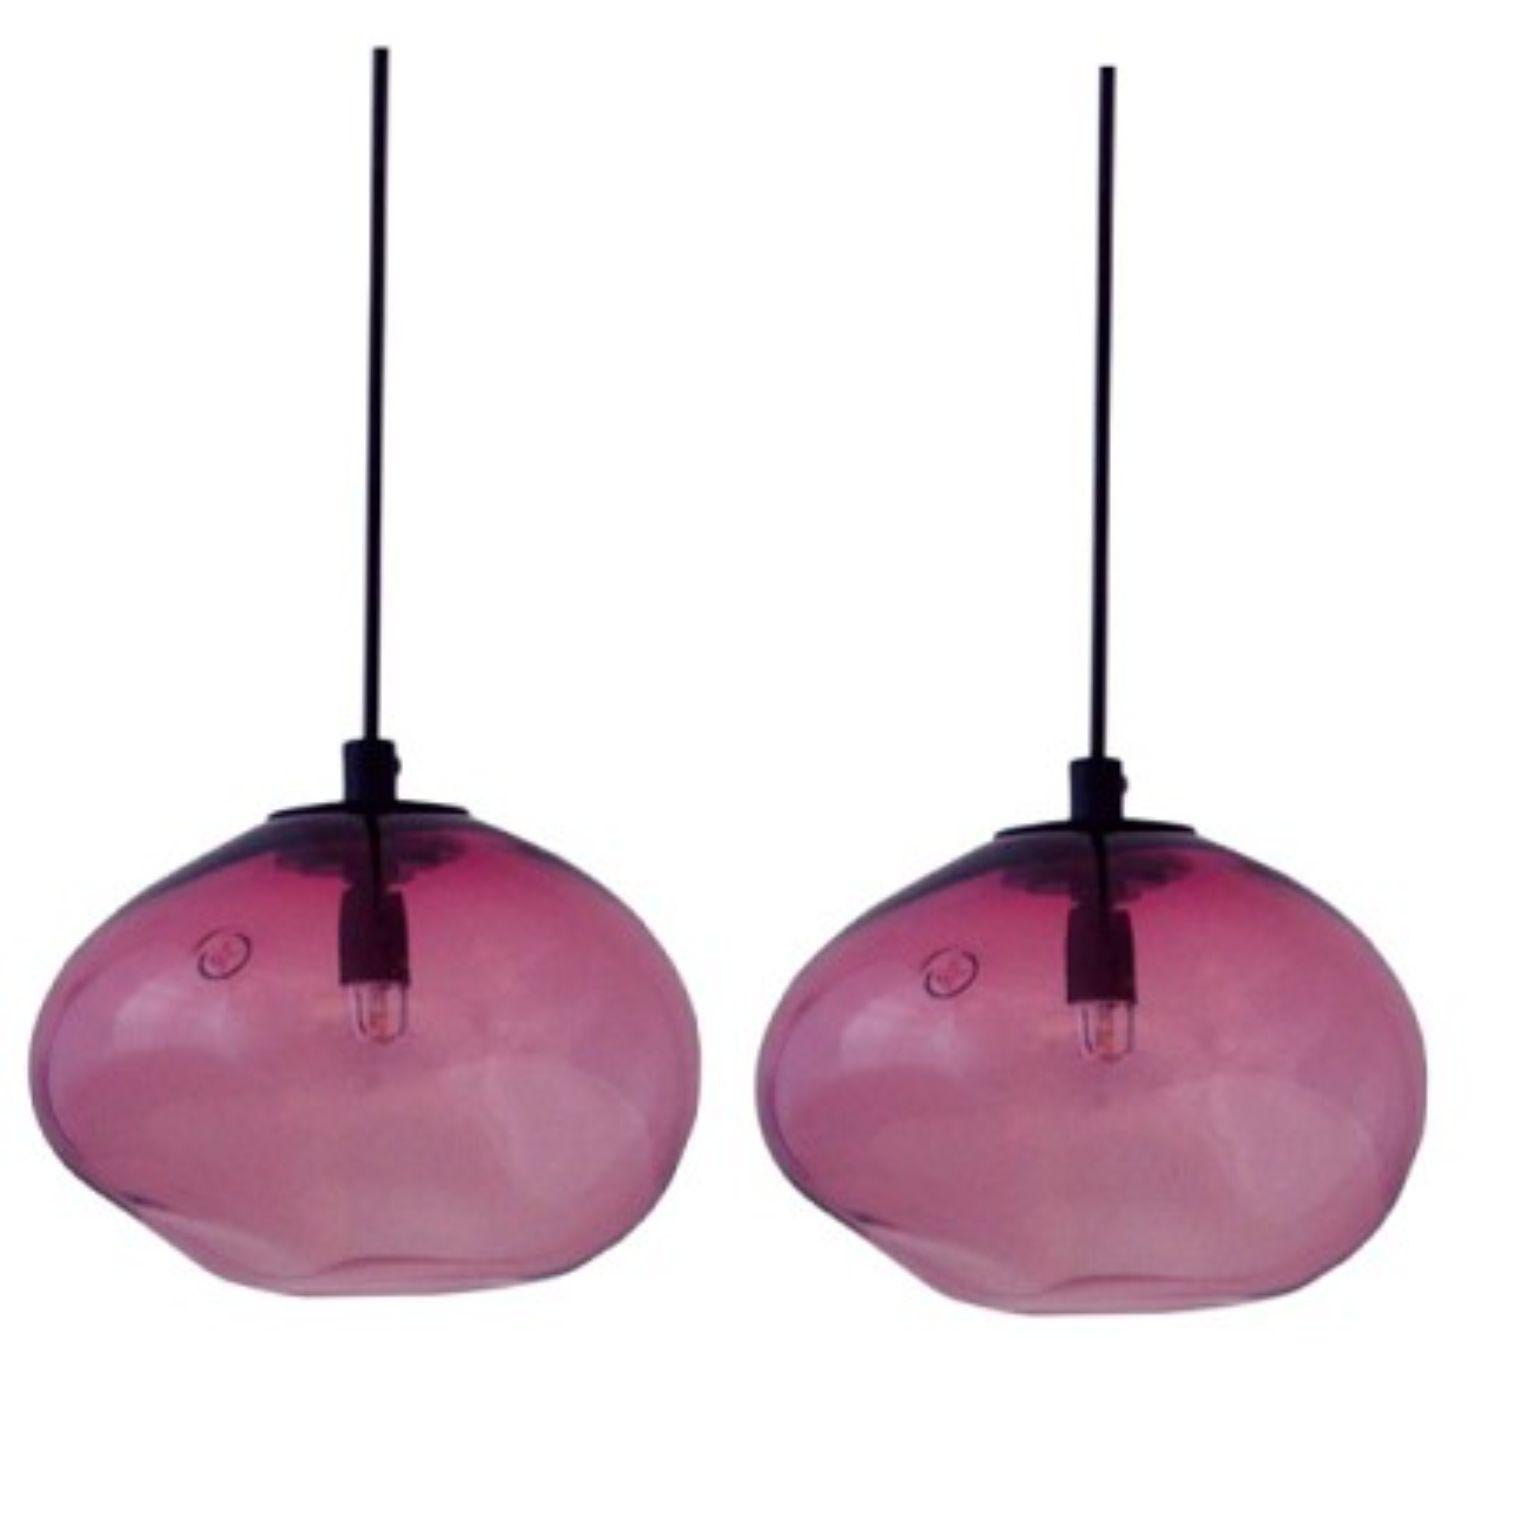 Set of 2 Starglow purple iridescent pendants by Eloa
No UL listed 
Material: glass, steel, silver
Dimensions: D15 x W13 x H100 cm
Also available in different colours and dimensions.

All our lamps can be wired according to each country. If sold to